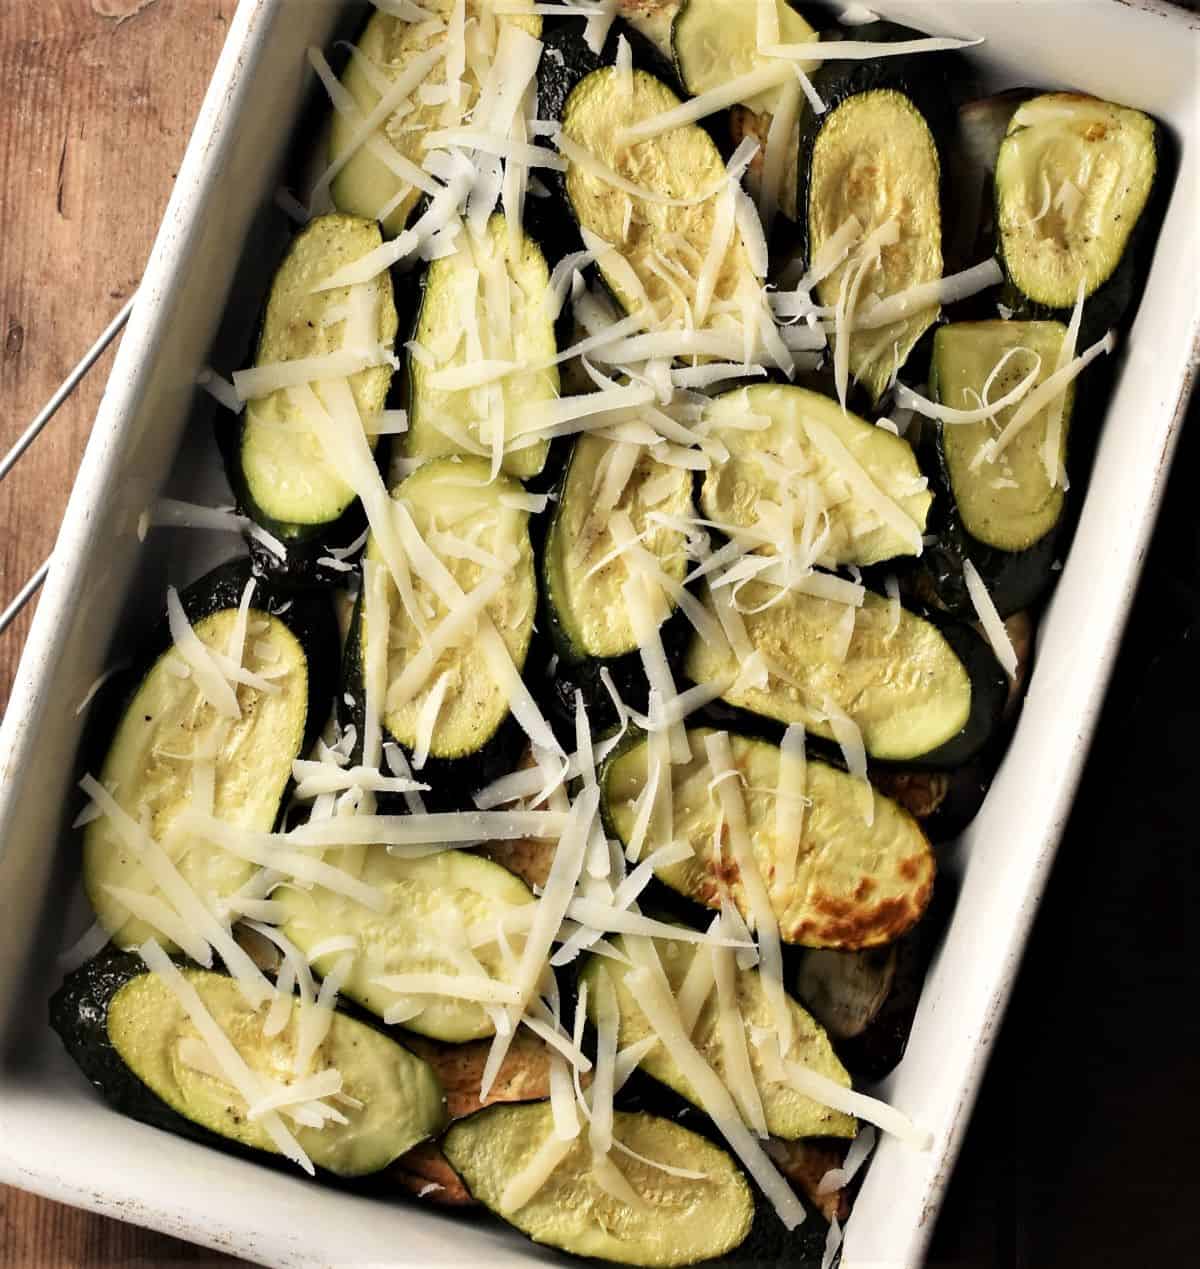 Layering moussaka with eggplant and zucchini slices.